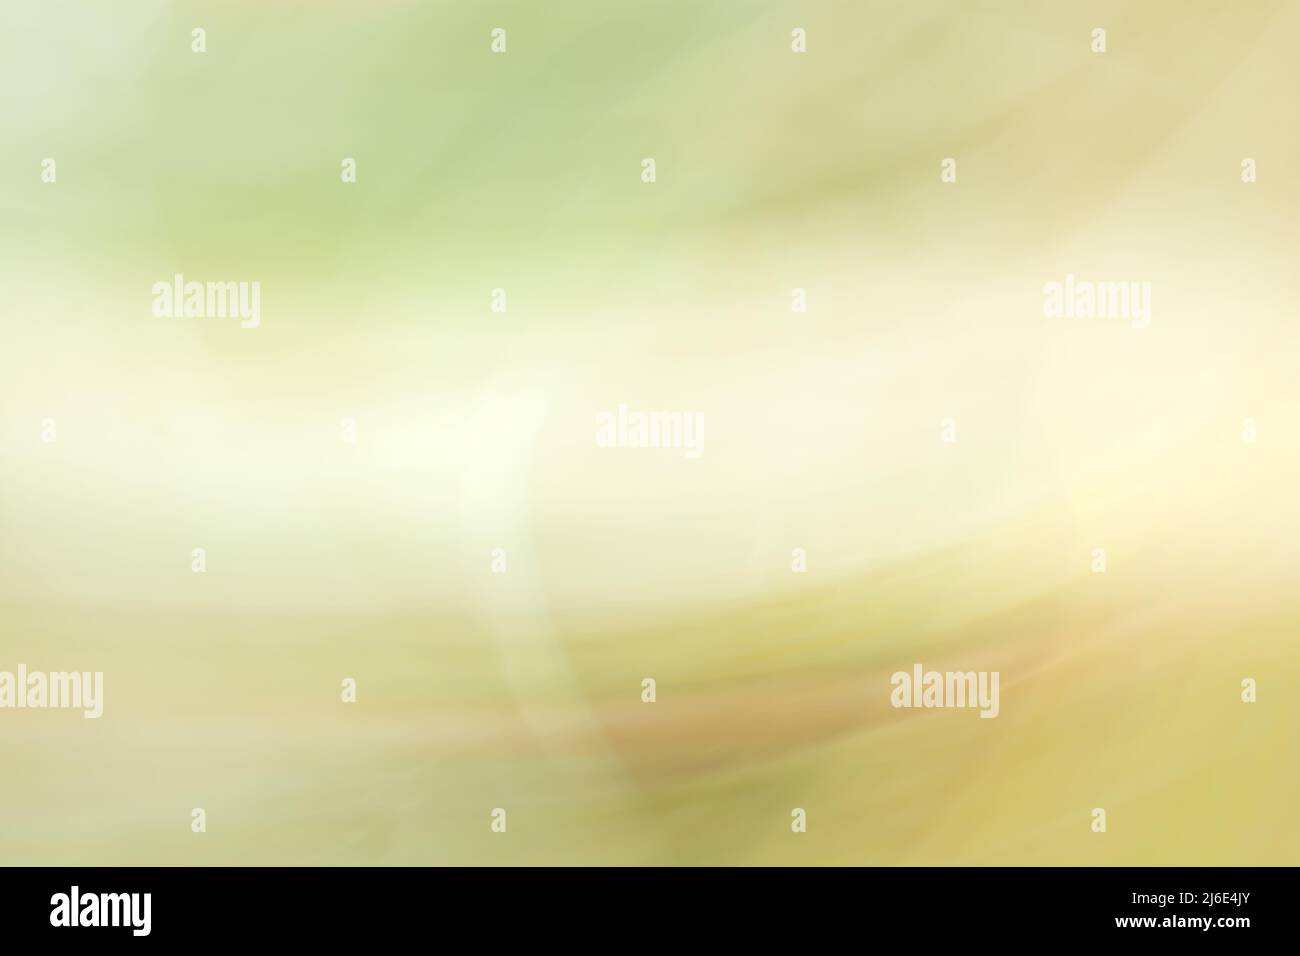 Gentle abstract banner background in green tones. Festive Stock Photo -